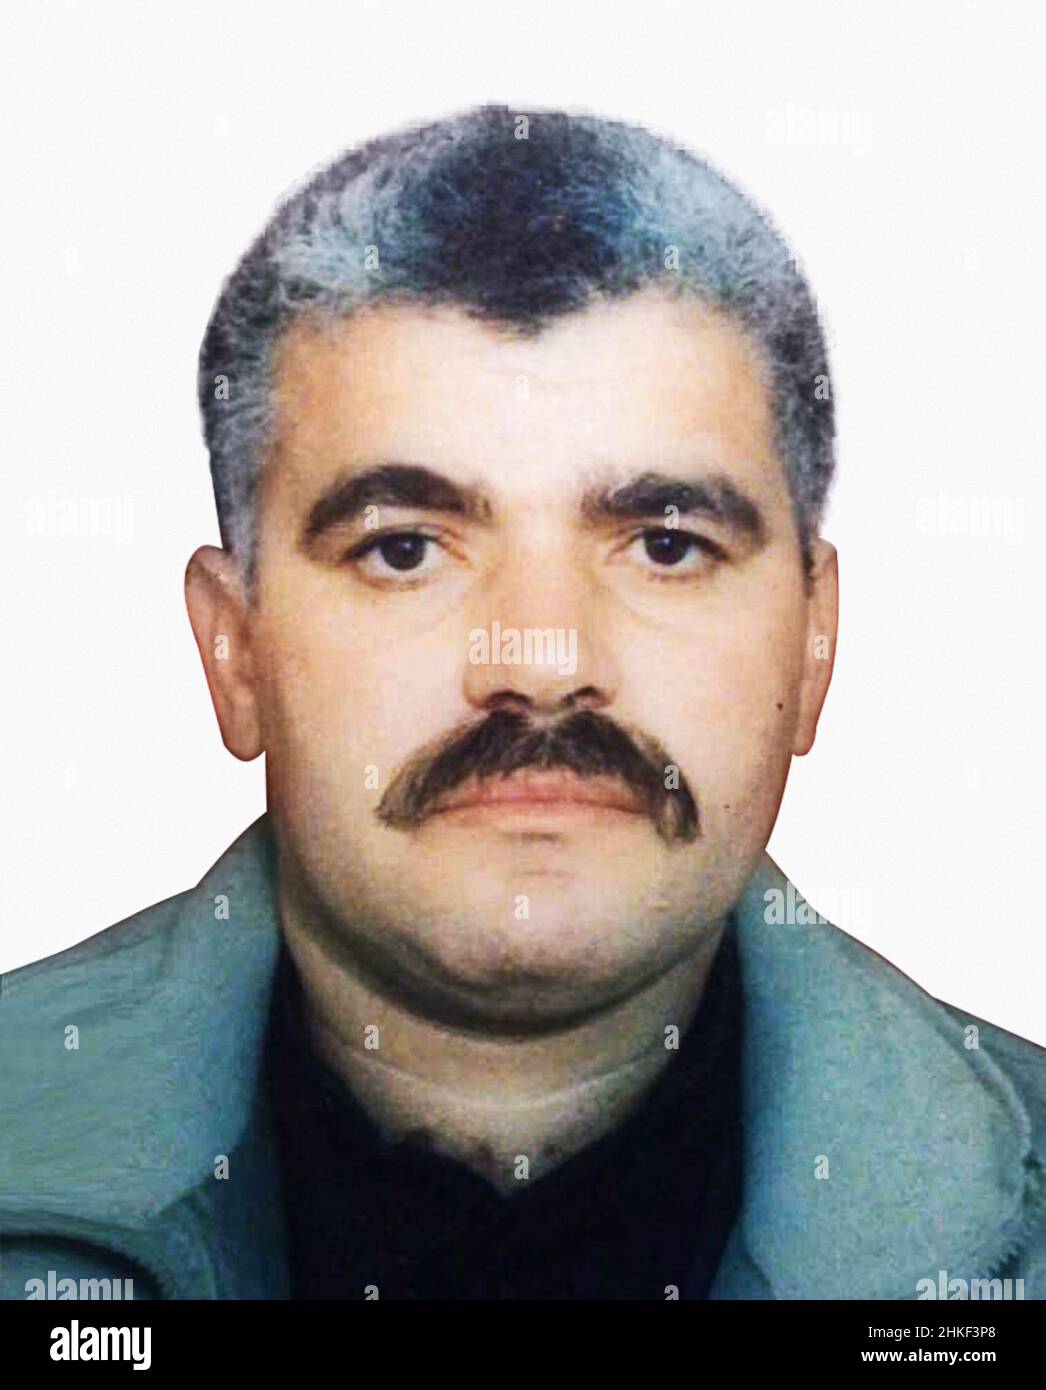 Baghdad, Iraq. 25th Feb, 2021. A rare photo of Abu Abdullah Al-Shami which was taken in the Iraqi capital of Baghdad in winter 2003. Al-Shami was an expert in producing explosives, in setting traps, and in forging alliances. He was one of the first Al-Qaeda operatives to prepare suicide car bombs and was also the most prominent player in suicide operations in Iraq. He was also training others in the production of explosives. Abu Abdullah Al-Shami, whose real name was Abd Al-Qadir Ahmad Mustafa Saqal, was a Syrian national born in Aleppo's Saif al-Dawla neighbourhood in 1970. He was killed a Stock Photo